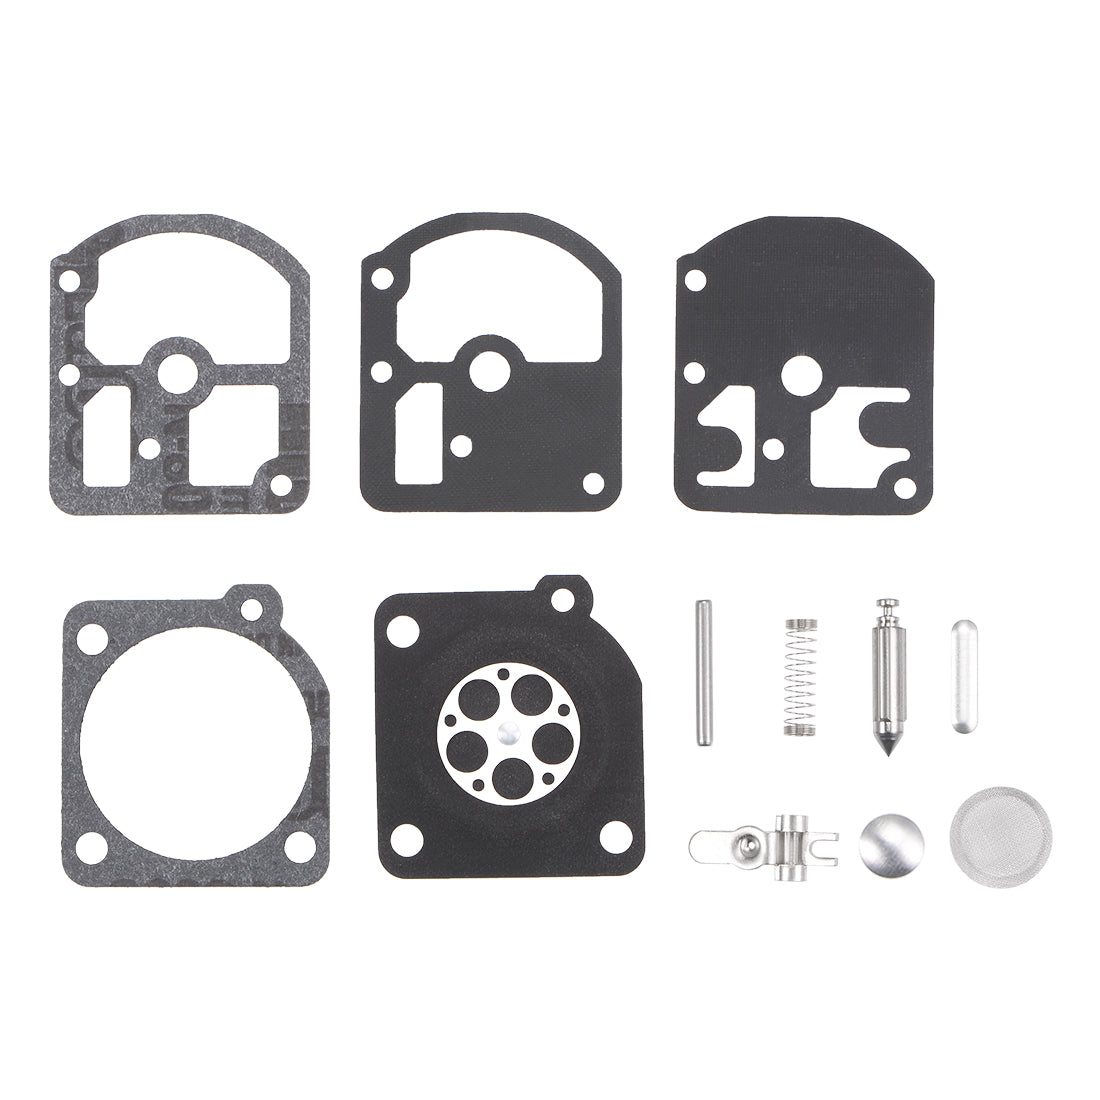 uxcell Uxcell RB-3uretor Rebuild Kit Gasket Diaphragm for RB-3 Series Chainsaw Engines 3pcs